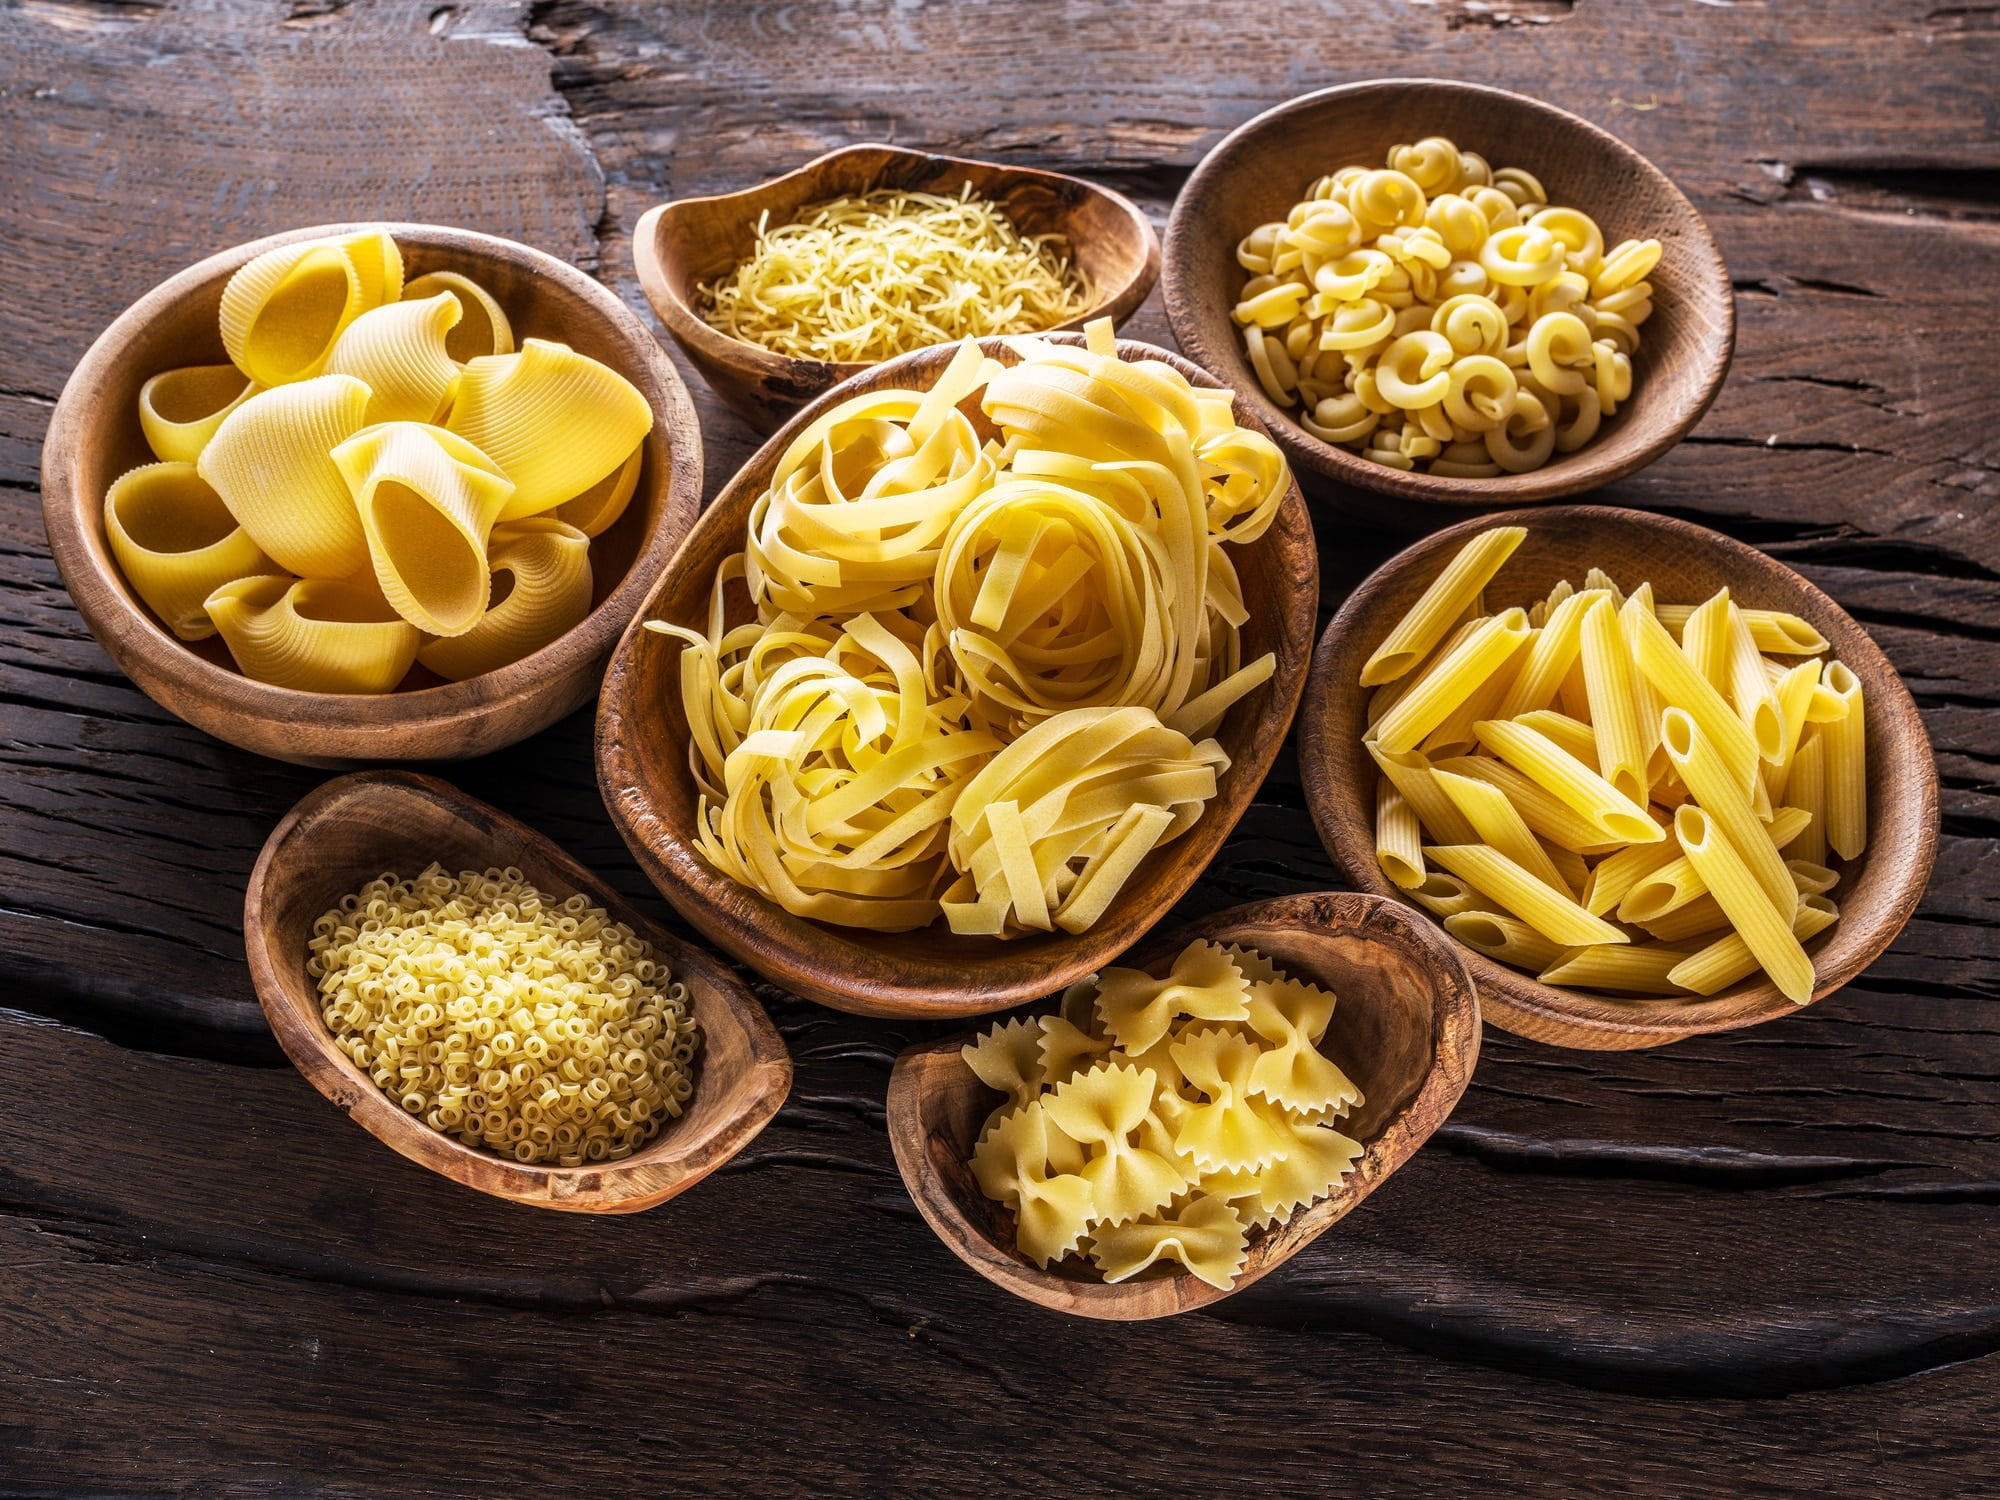 Different pasta types in wooden bowls on the table. Top view.